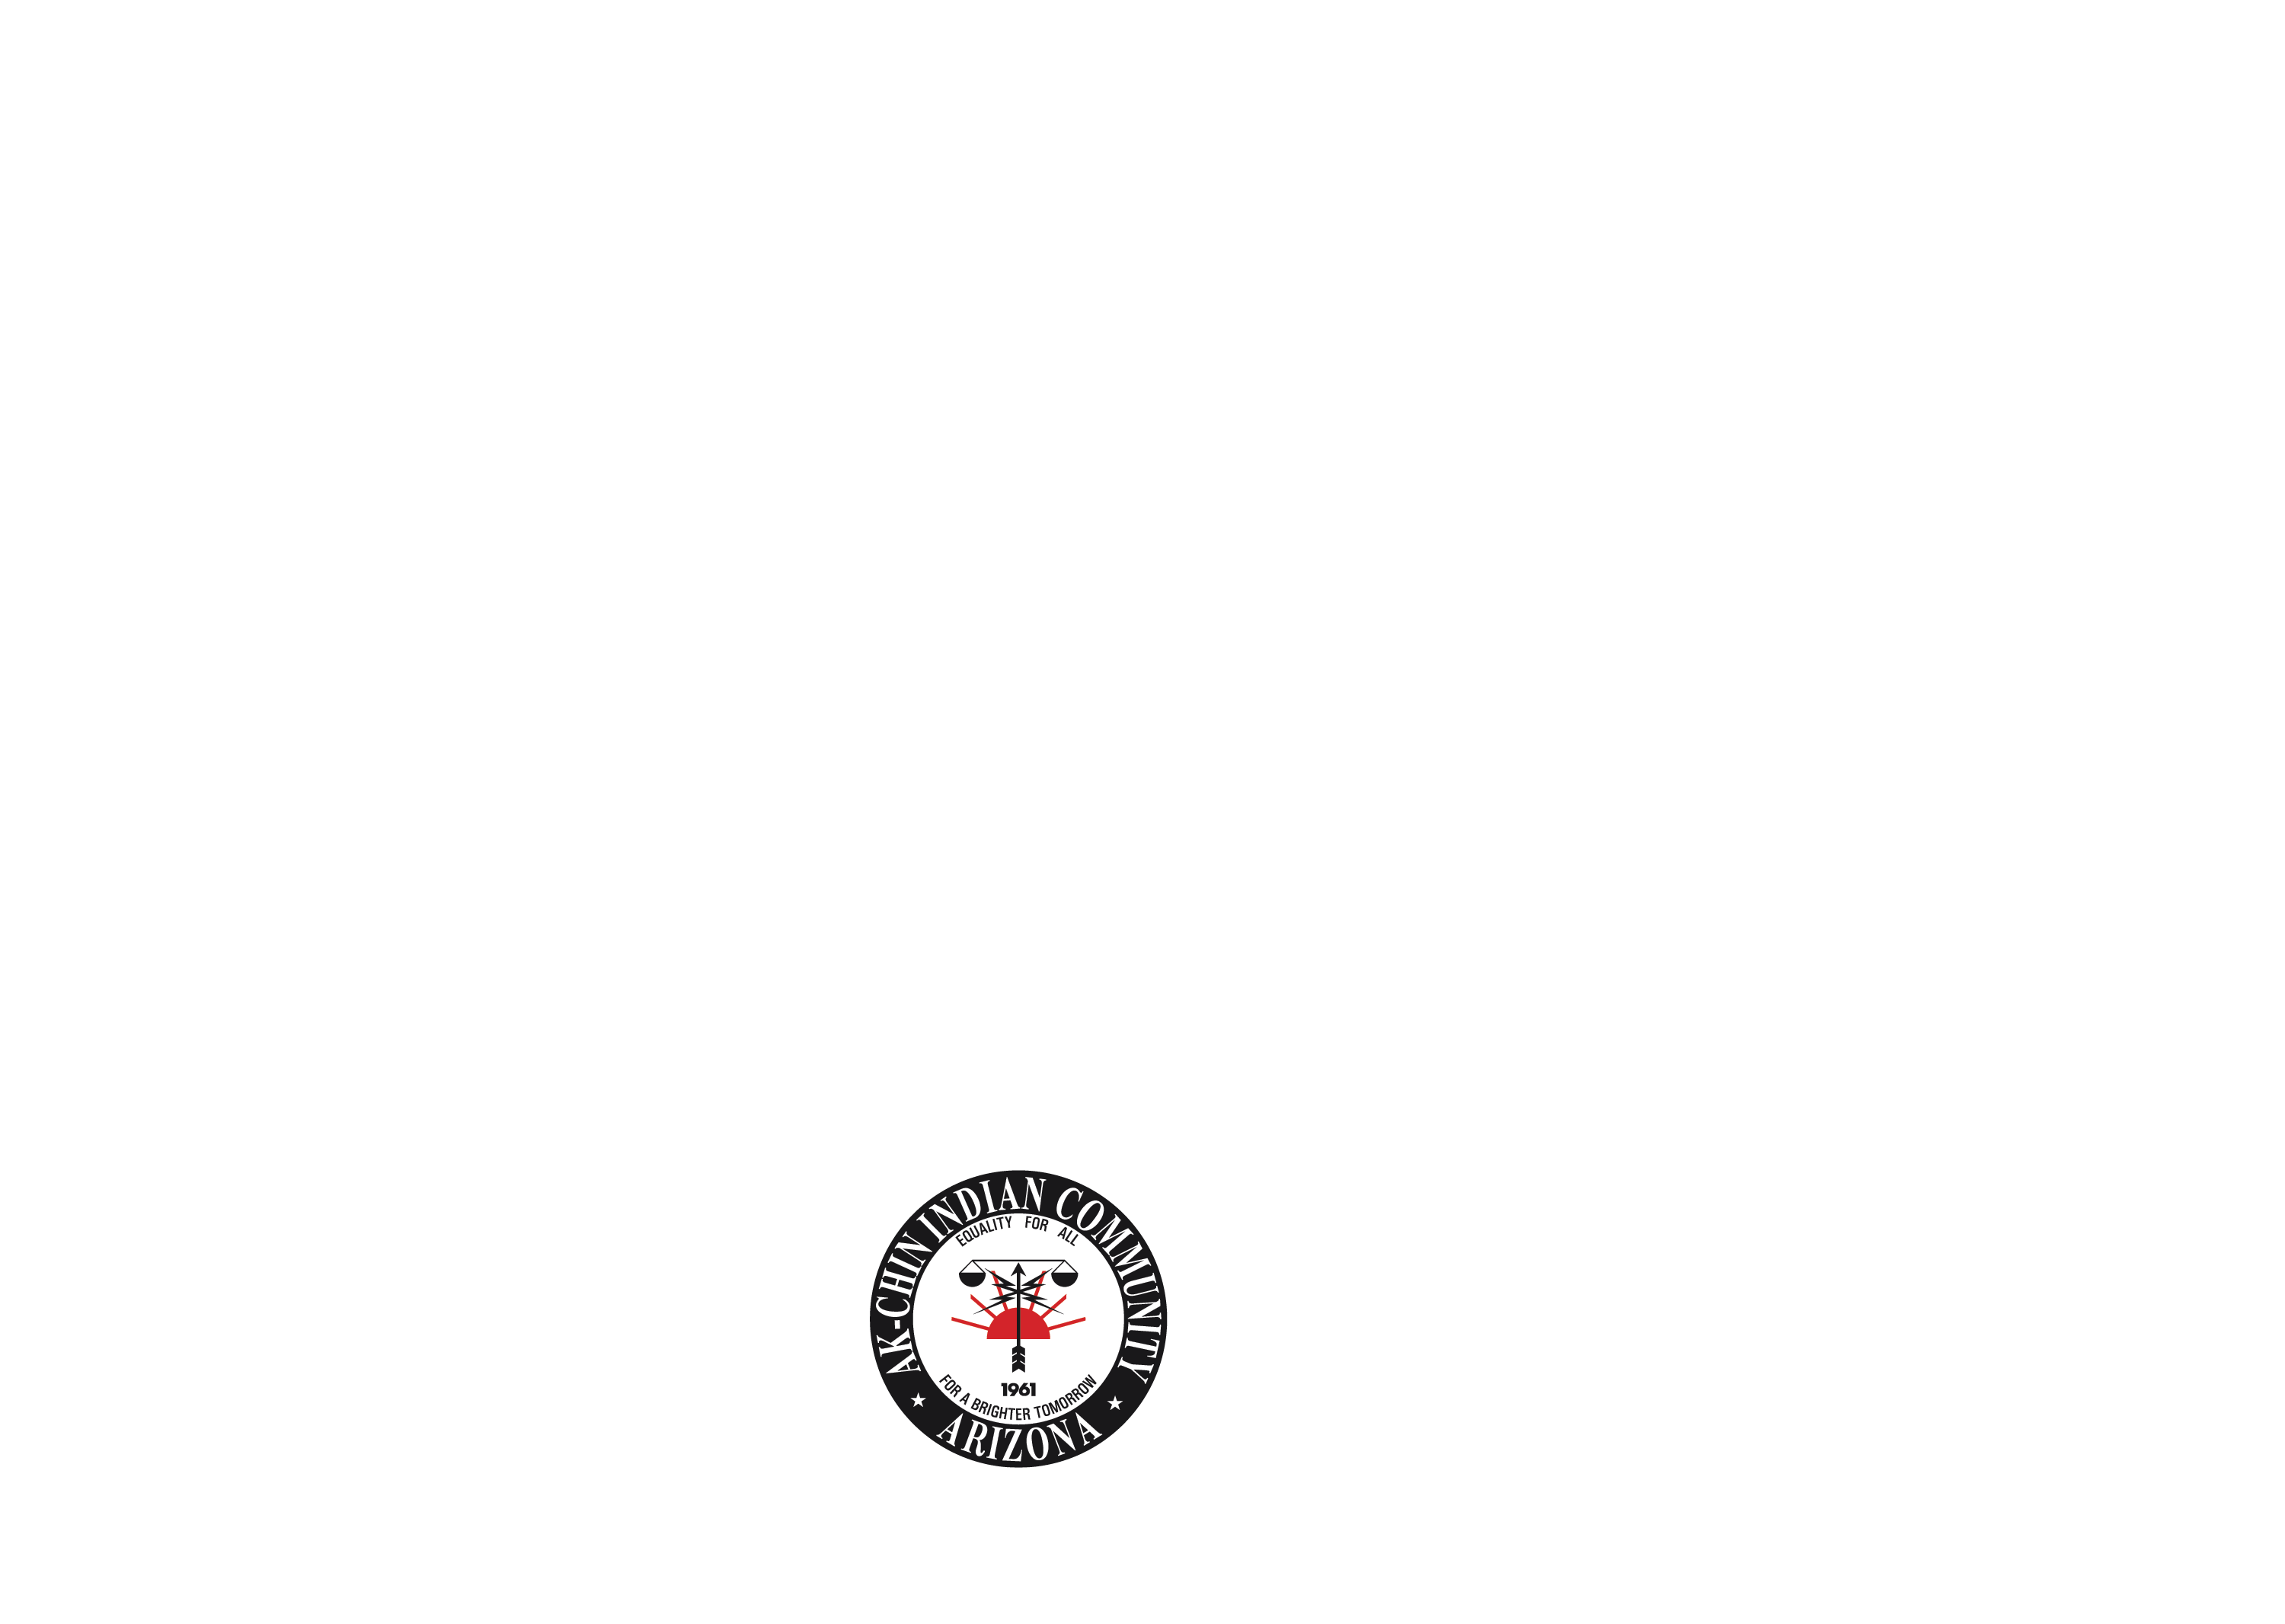 Give-A-Thon nets more than $2.1 million for Phoenix Children's